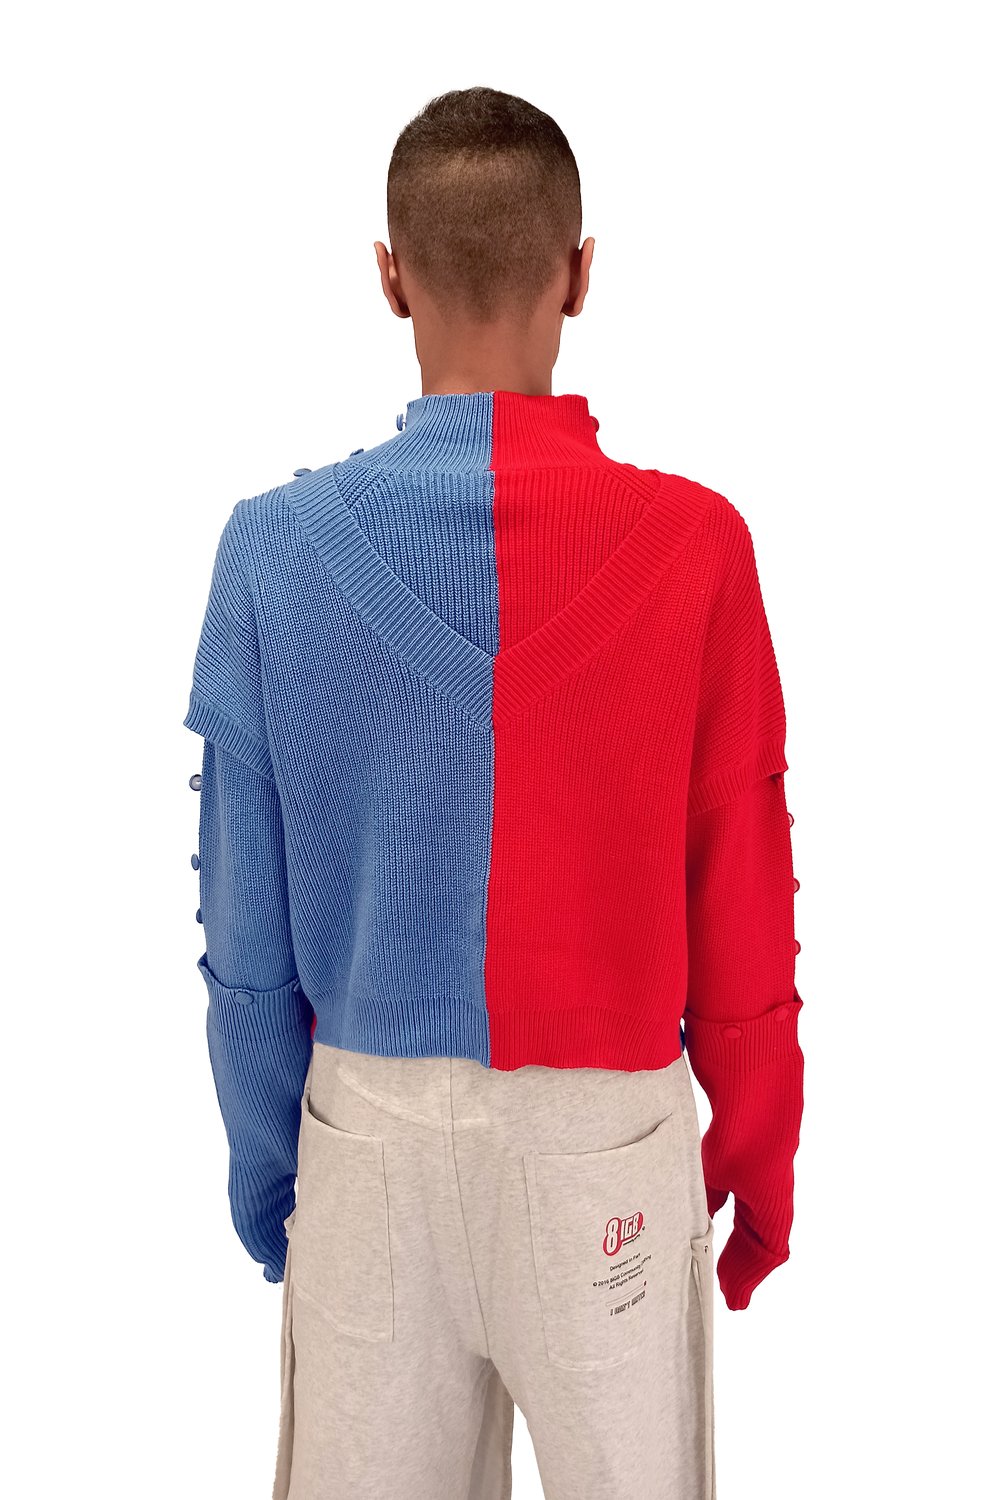 JOLLY  SWEATER red-blue